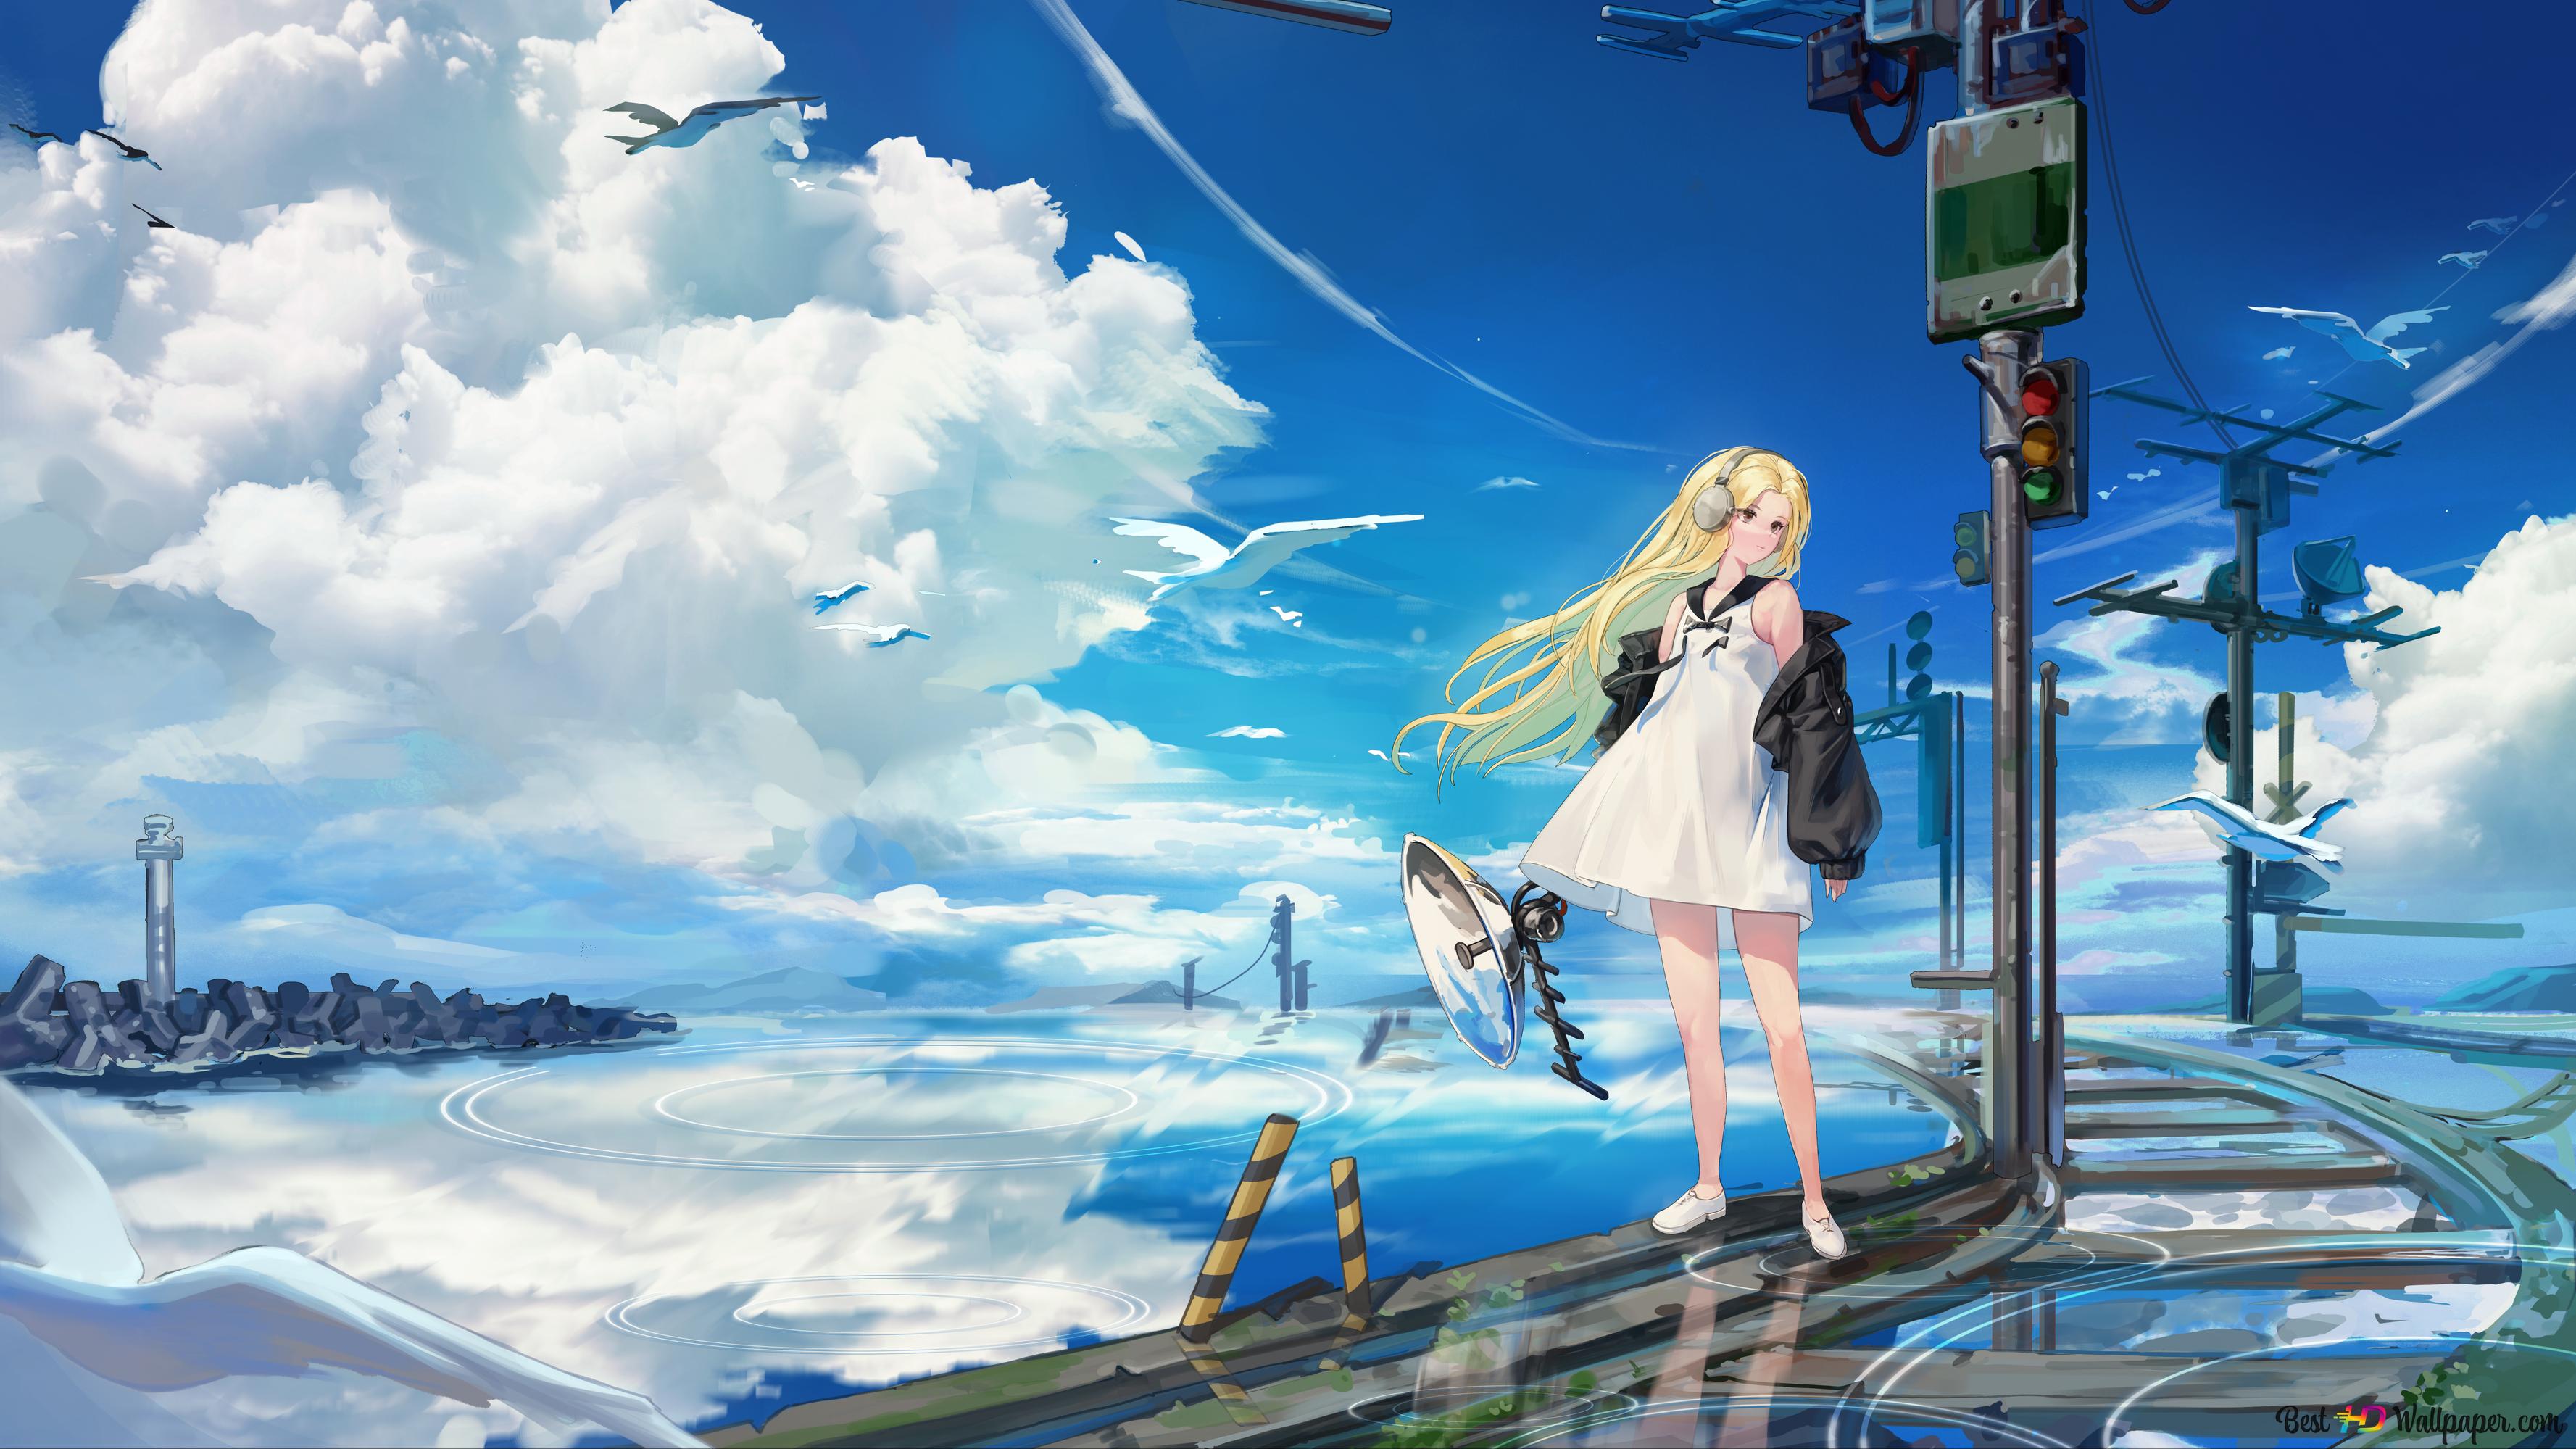 Beautiful anime girl in blonde white dress posing neartrain tracks and traffic lights under cloudy sky 6K wallpaper download